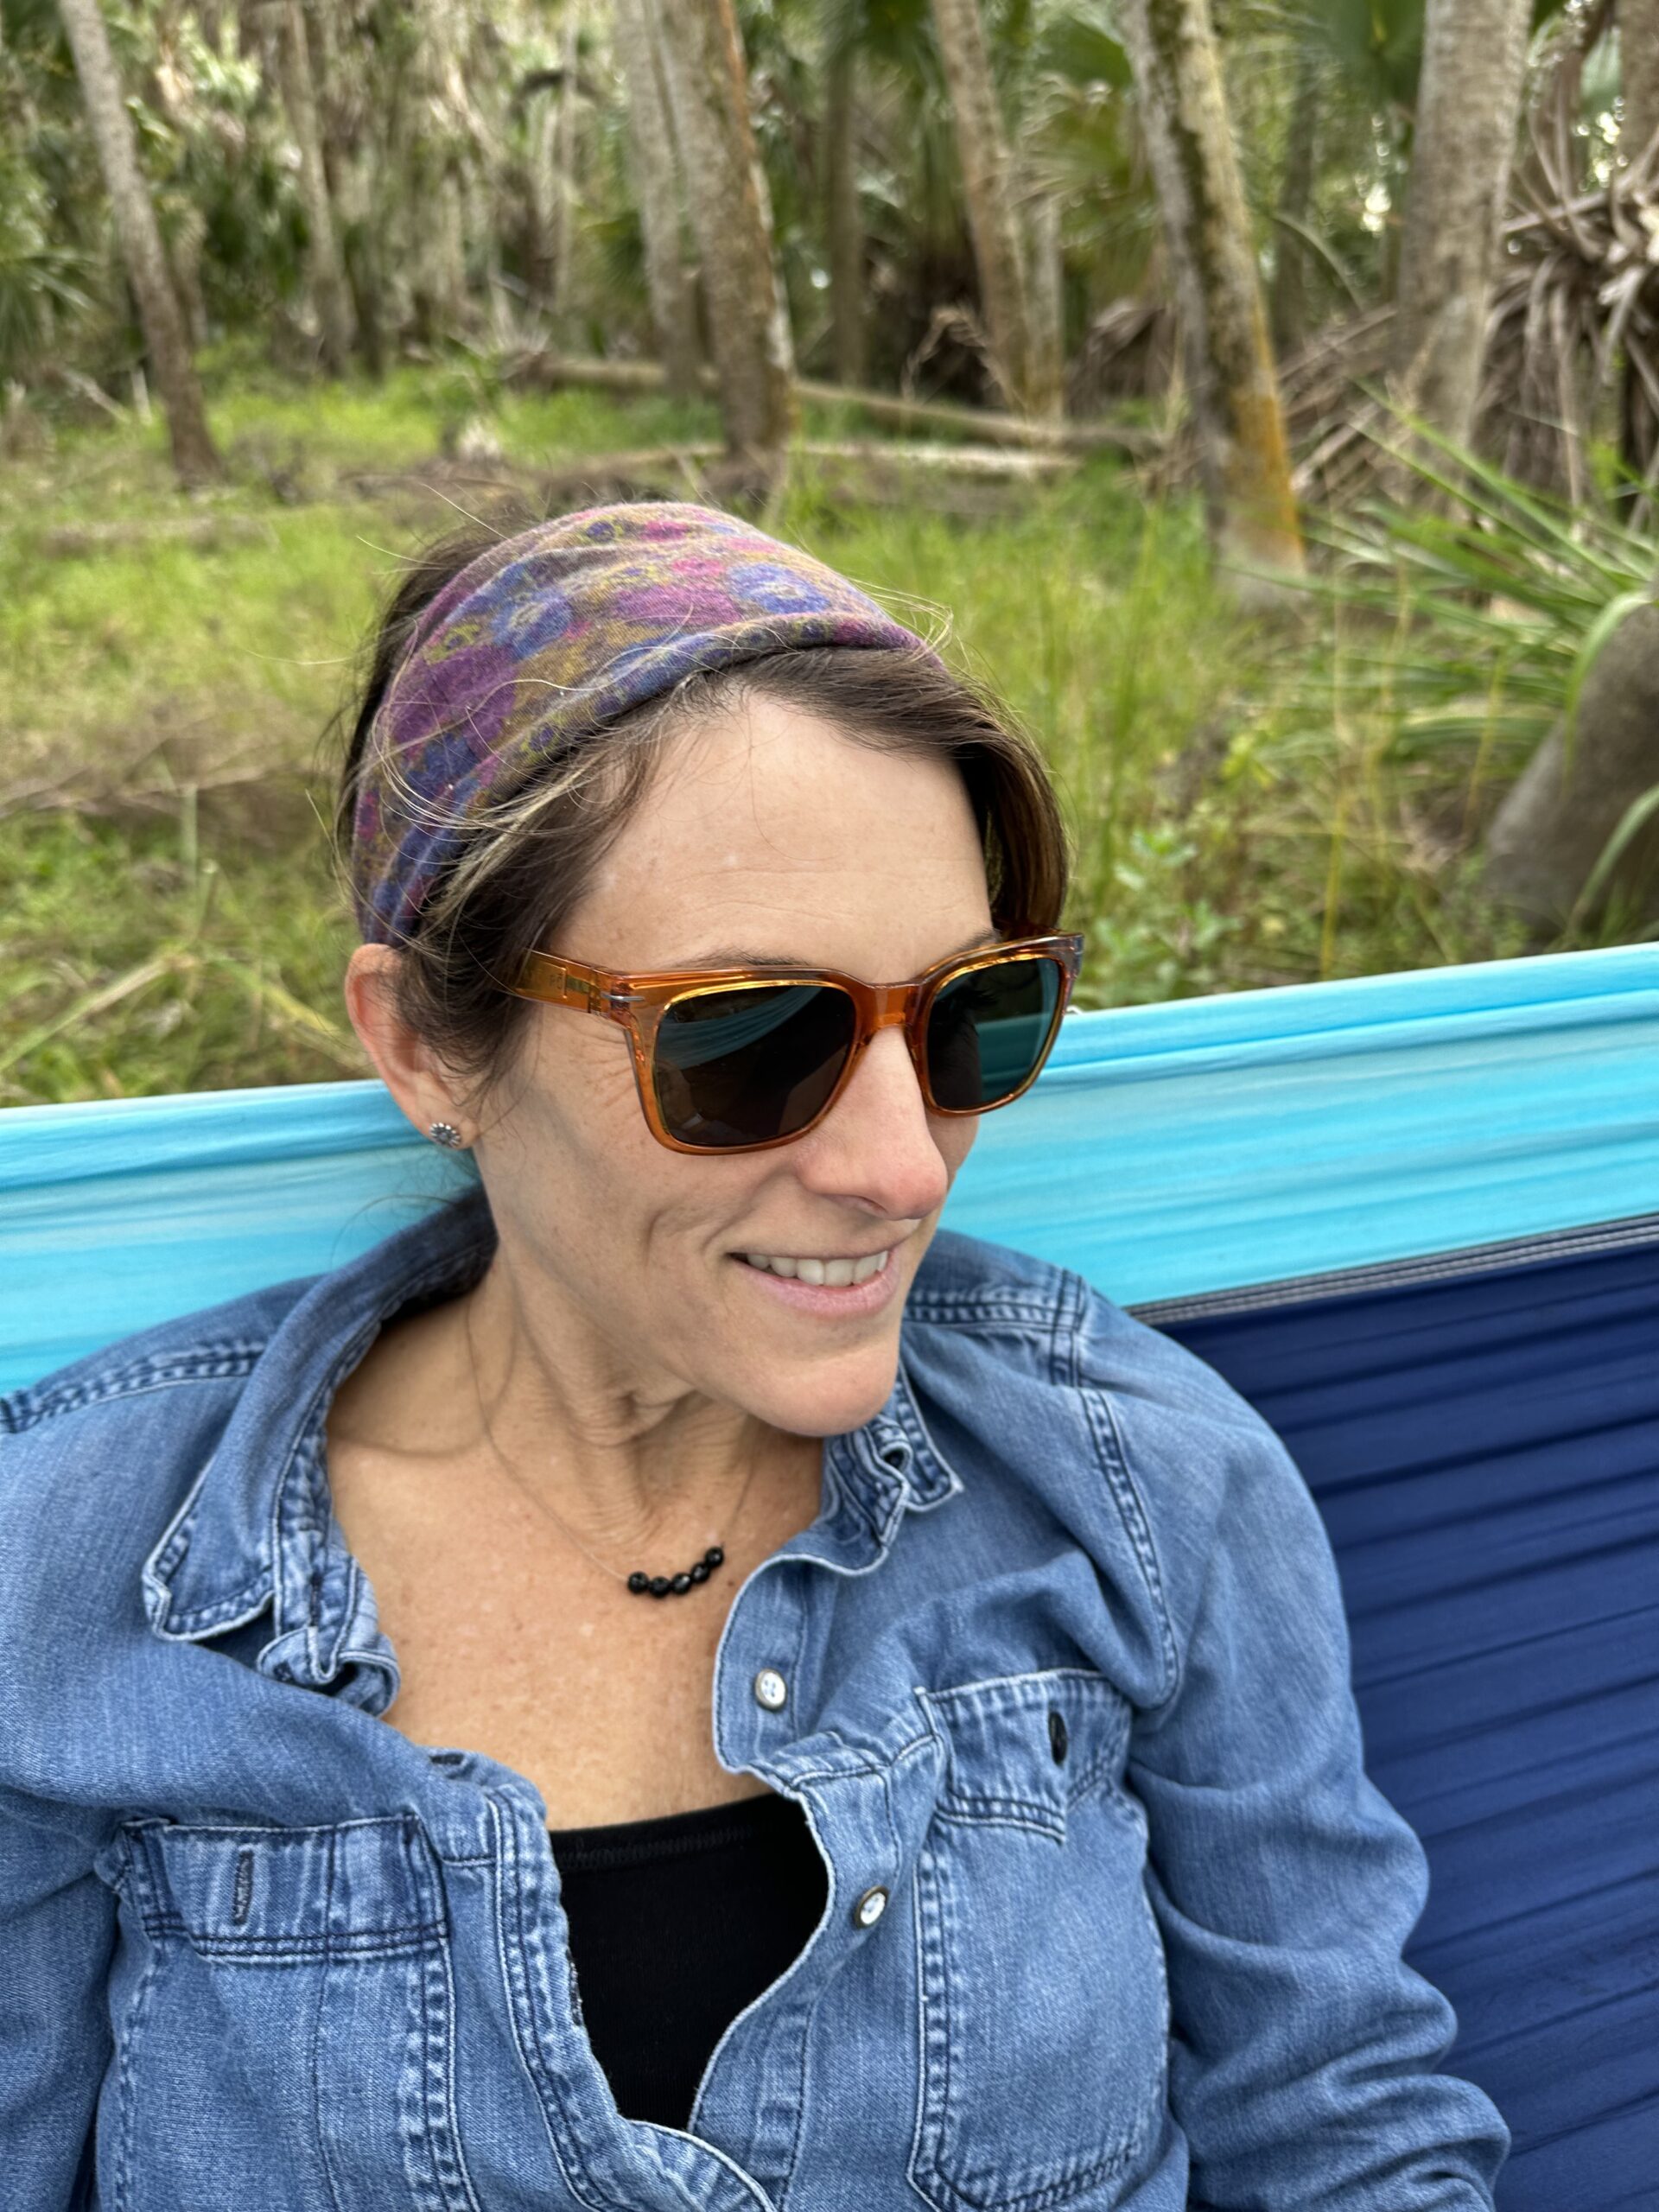 A woman wearing sunglasses and a headband in a hammock.